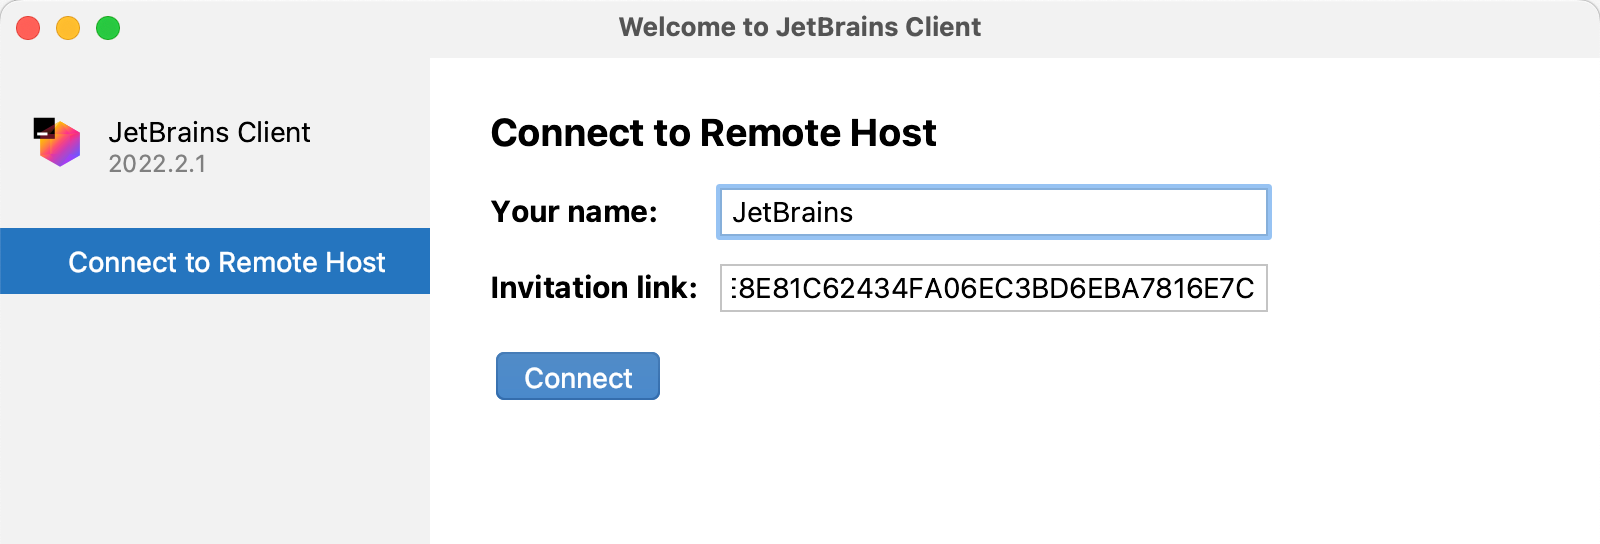 JetBrains Client welcome screen